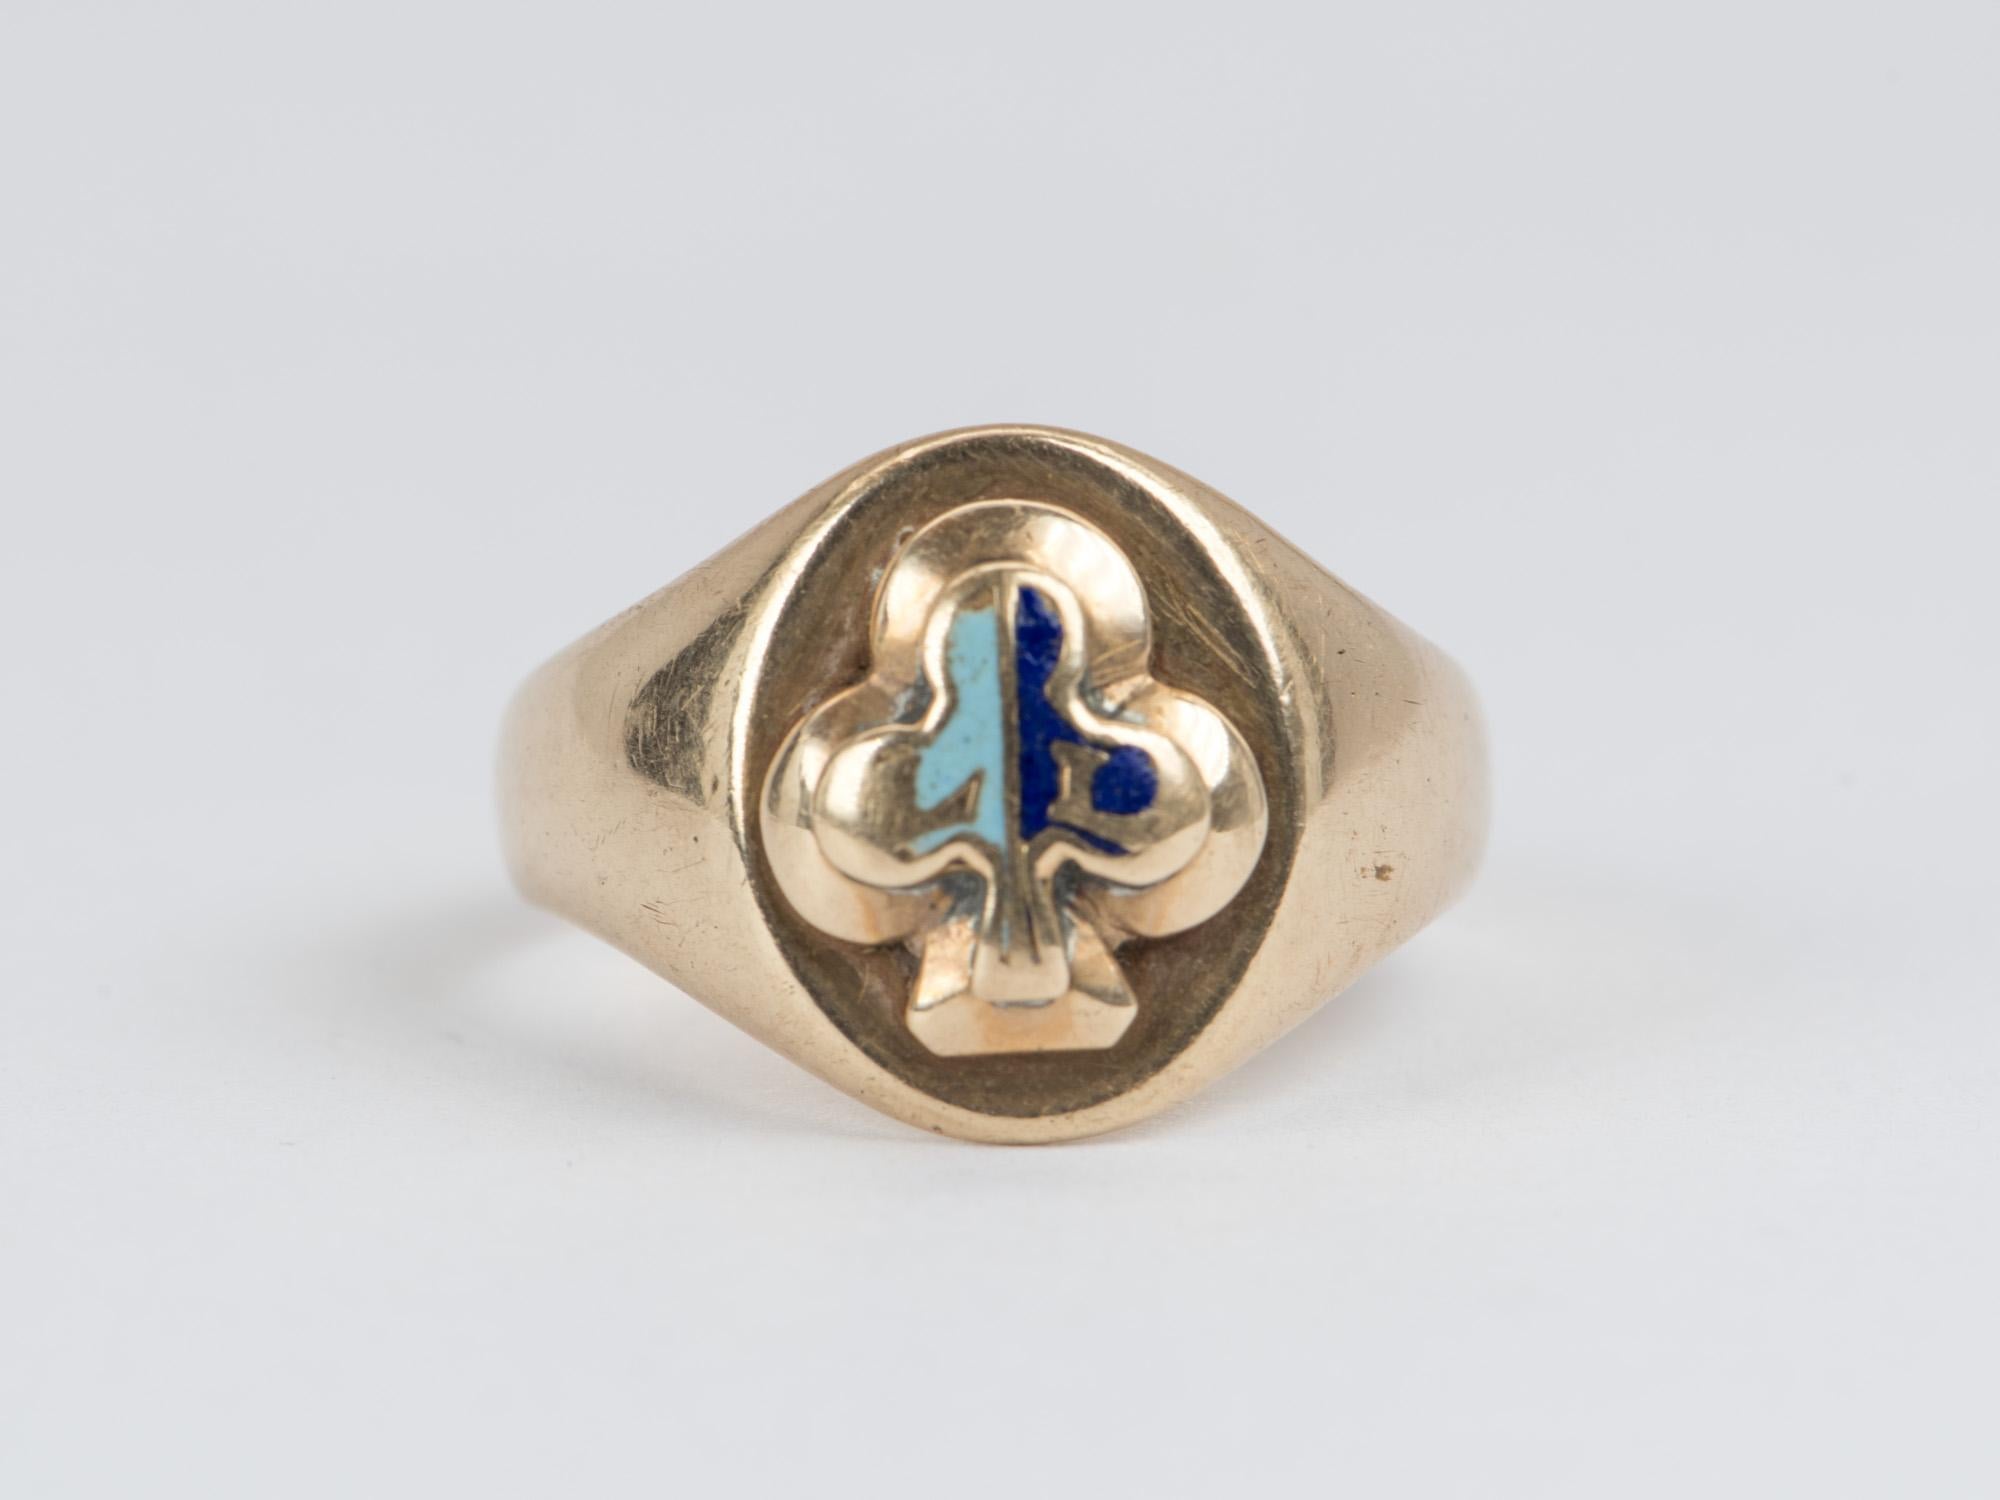 ♥ Solid 14k yellow gold antique shamrock enamel signet ring 

 ♥ The ring measures 14mm in length, 11mm in width, 3mm in height 

♥ US Size 7.75 (Free resizing up or down 1 size)
♥ Band width: 5.5mm-2.9mm

♥ All stone(s) used are genuine,